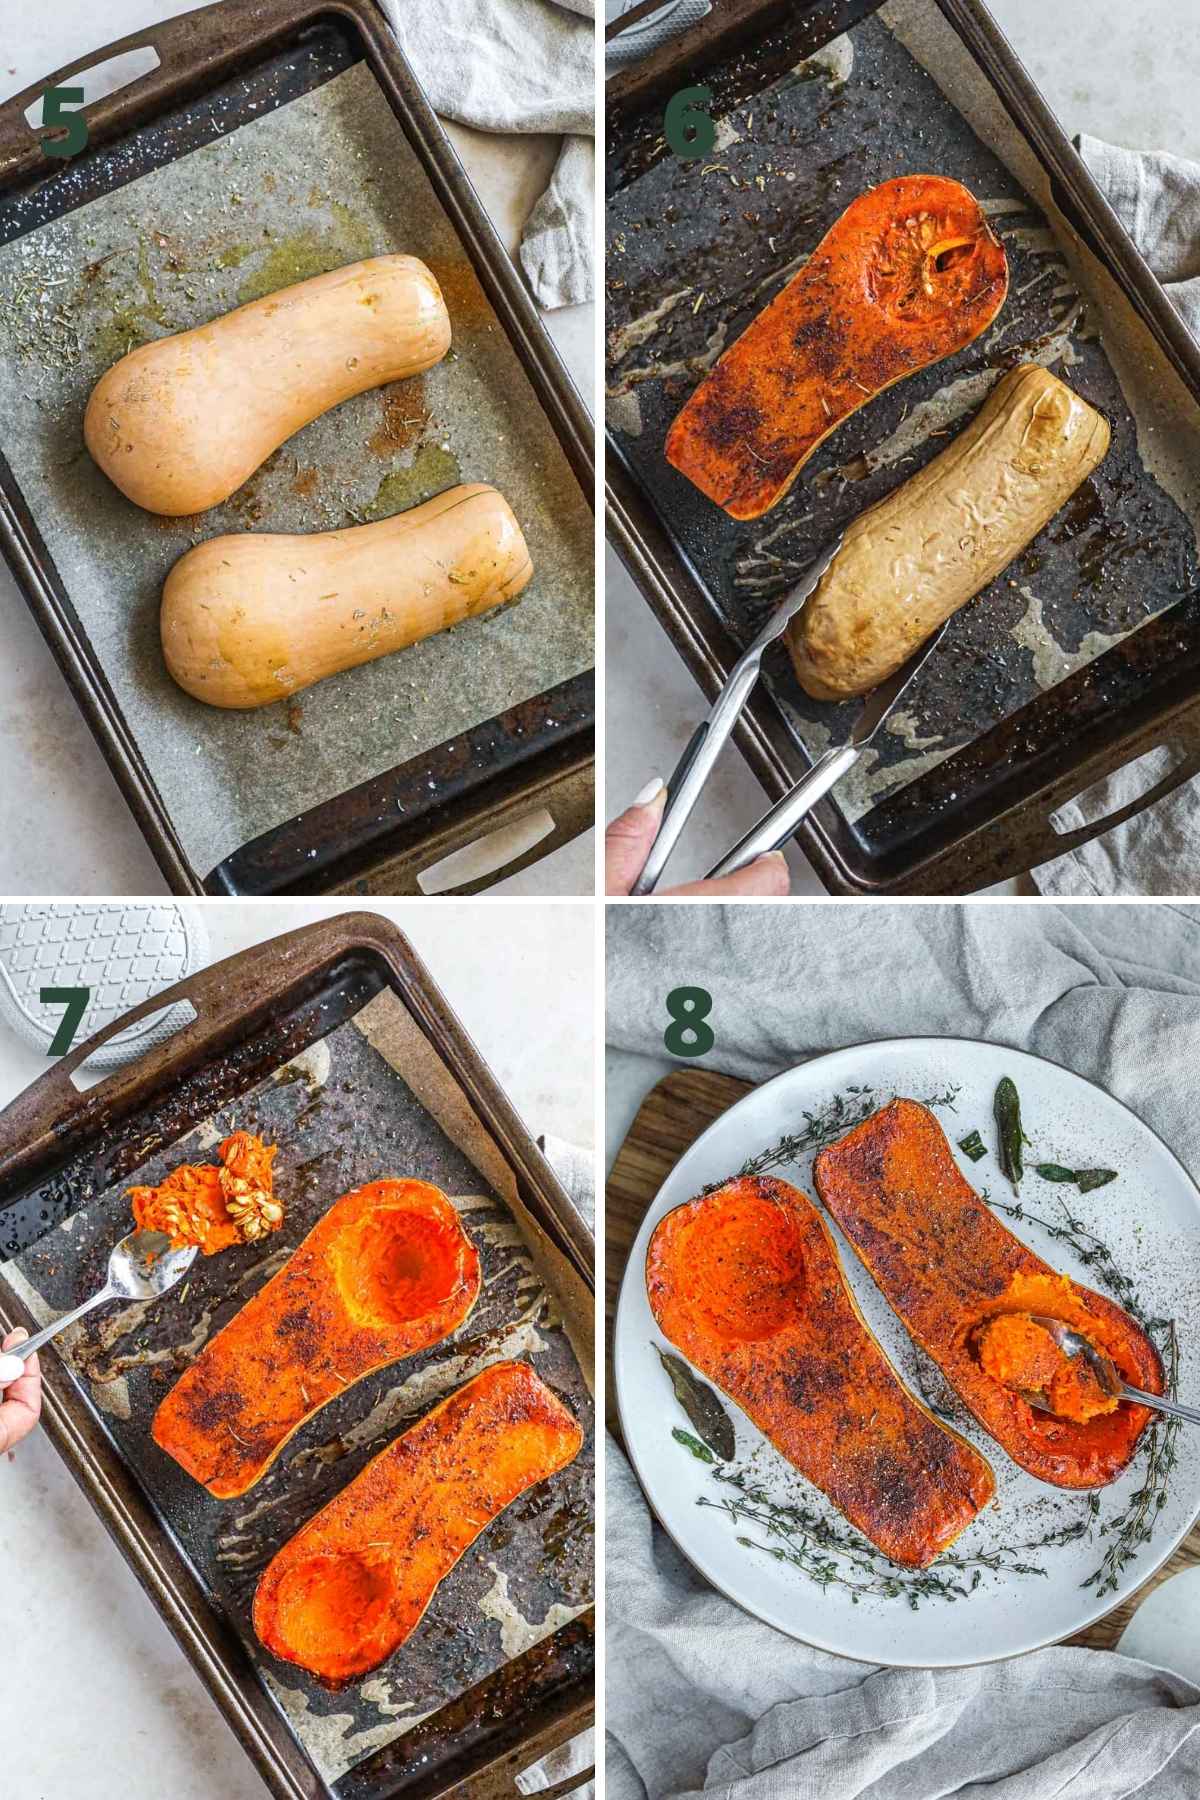 Steps to make oven roasted butternut squash, including baking the squash, removing the seeds, and serving with herbs.